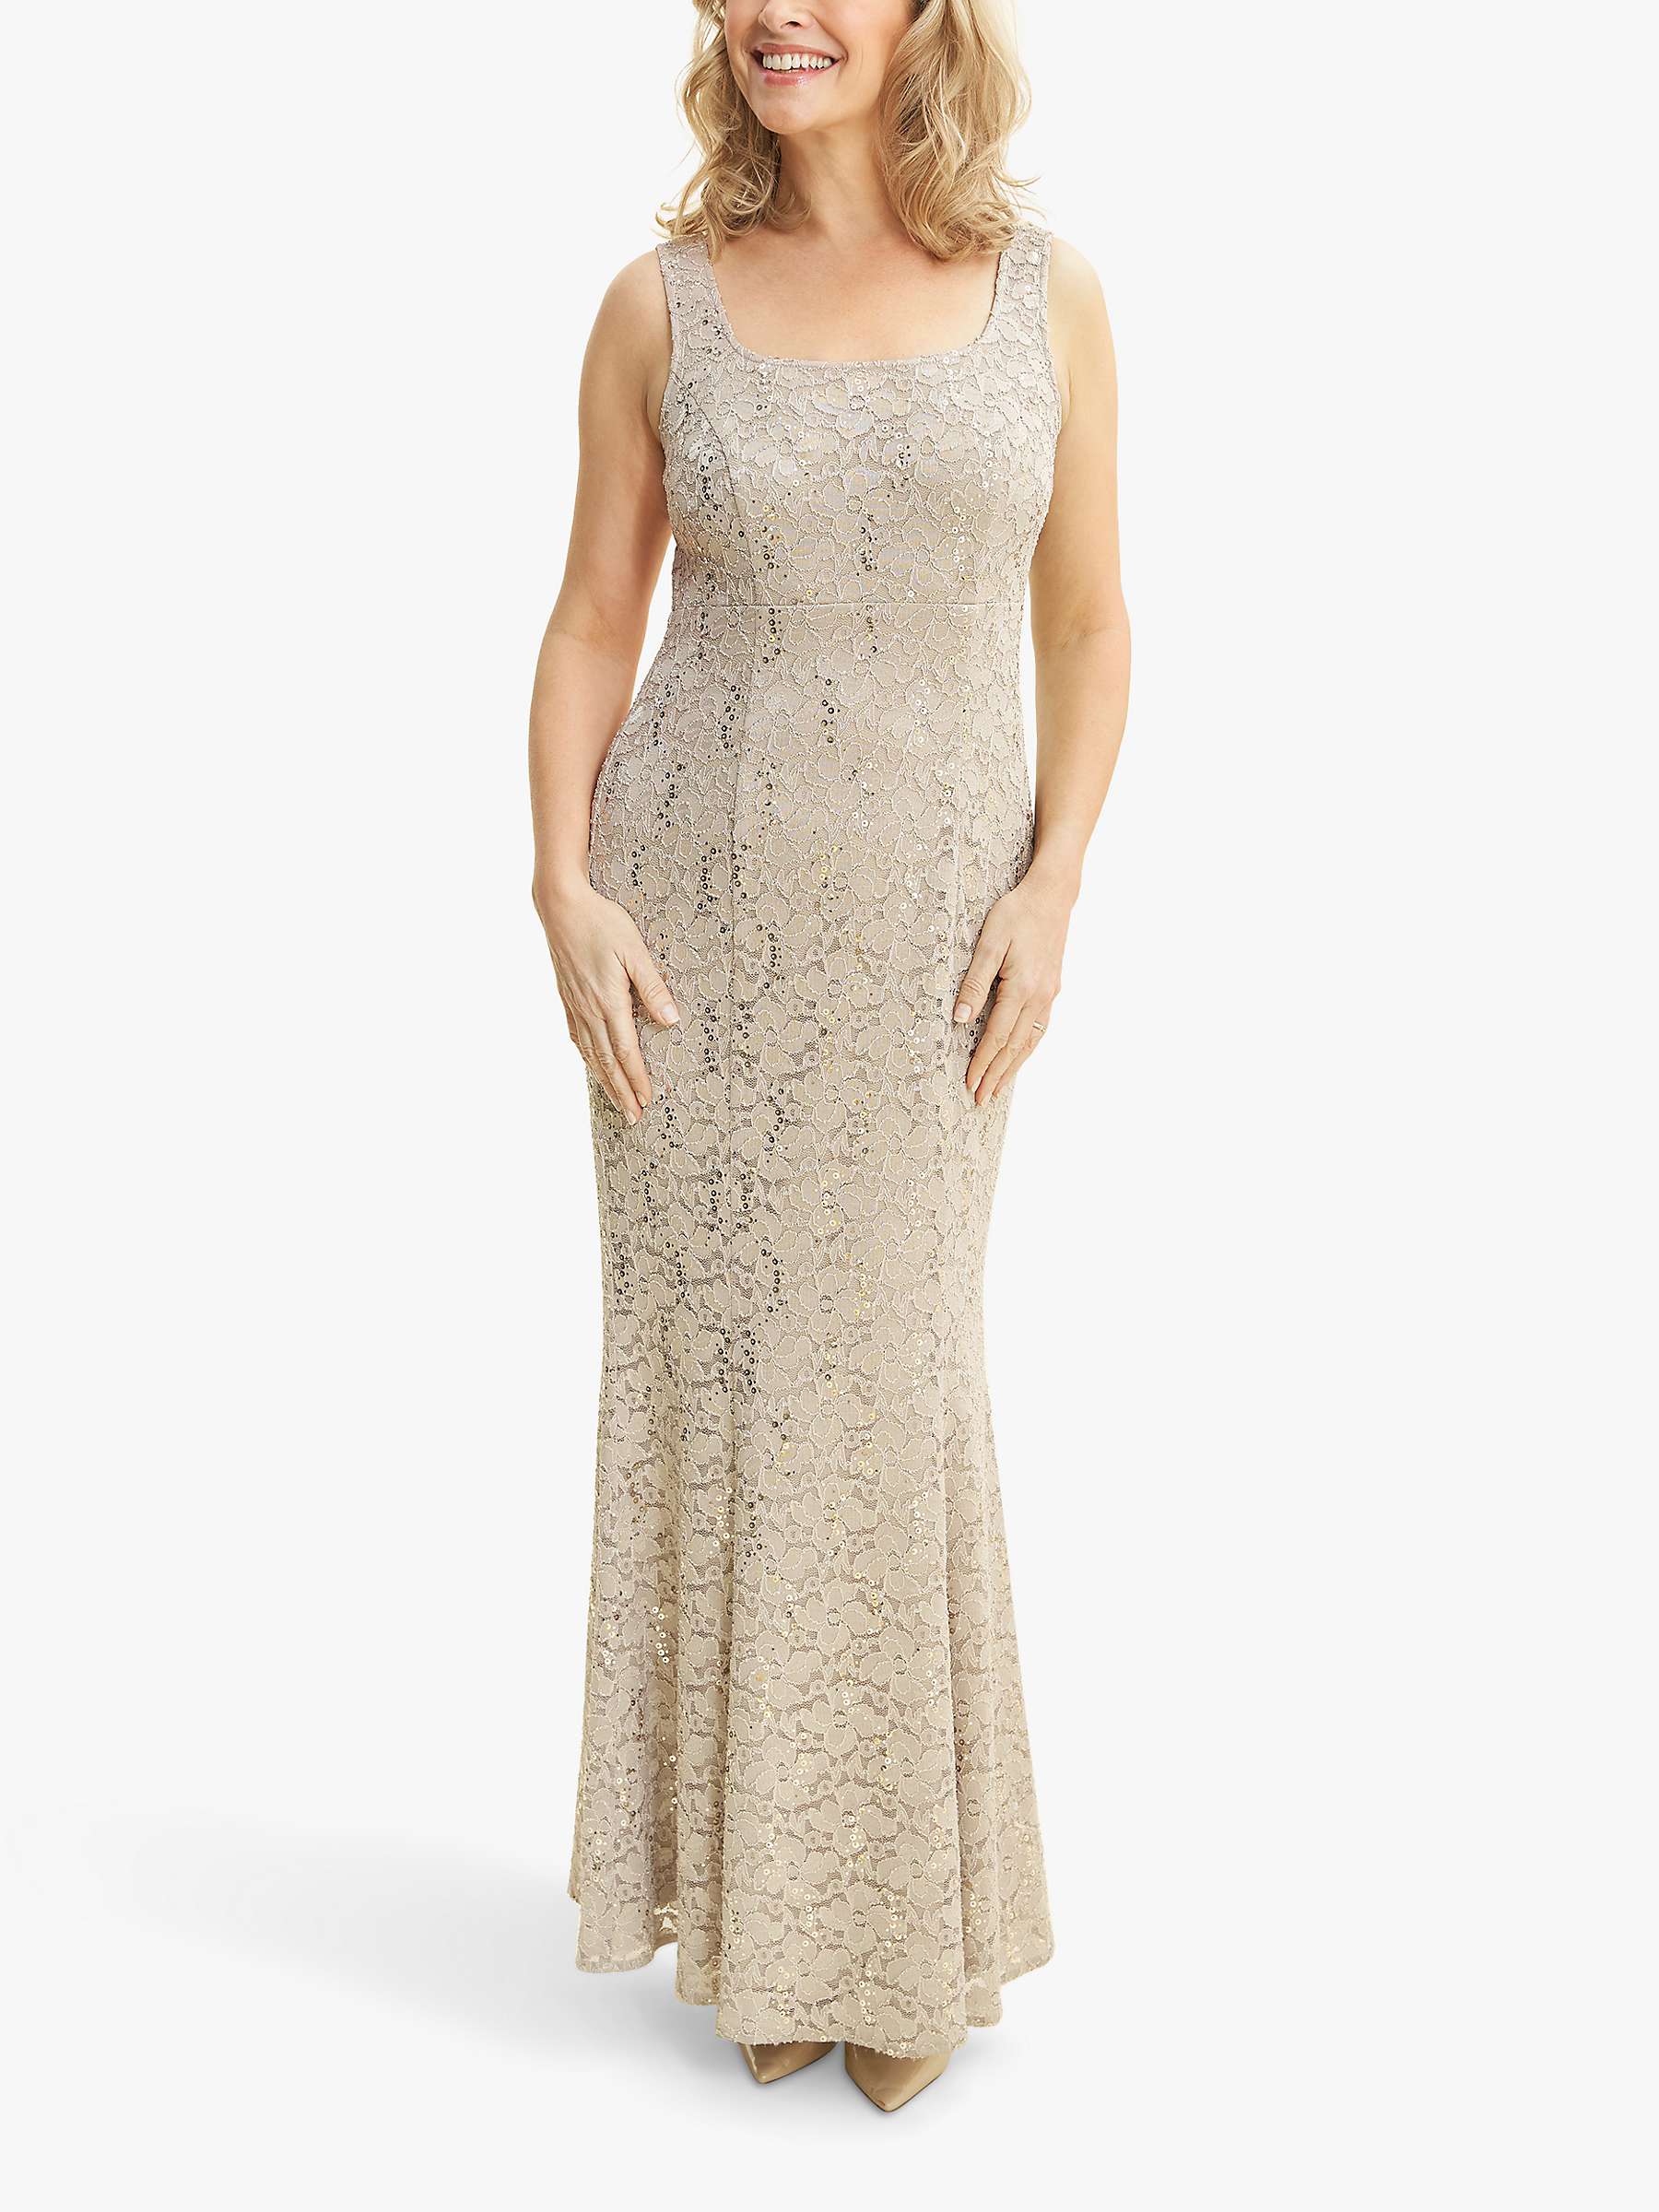 Buy Gina Bacconi Carissa Sequin Lace Maxi Dress and Jacket, Champagne Online at johnlewis.com